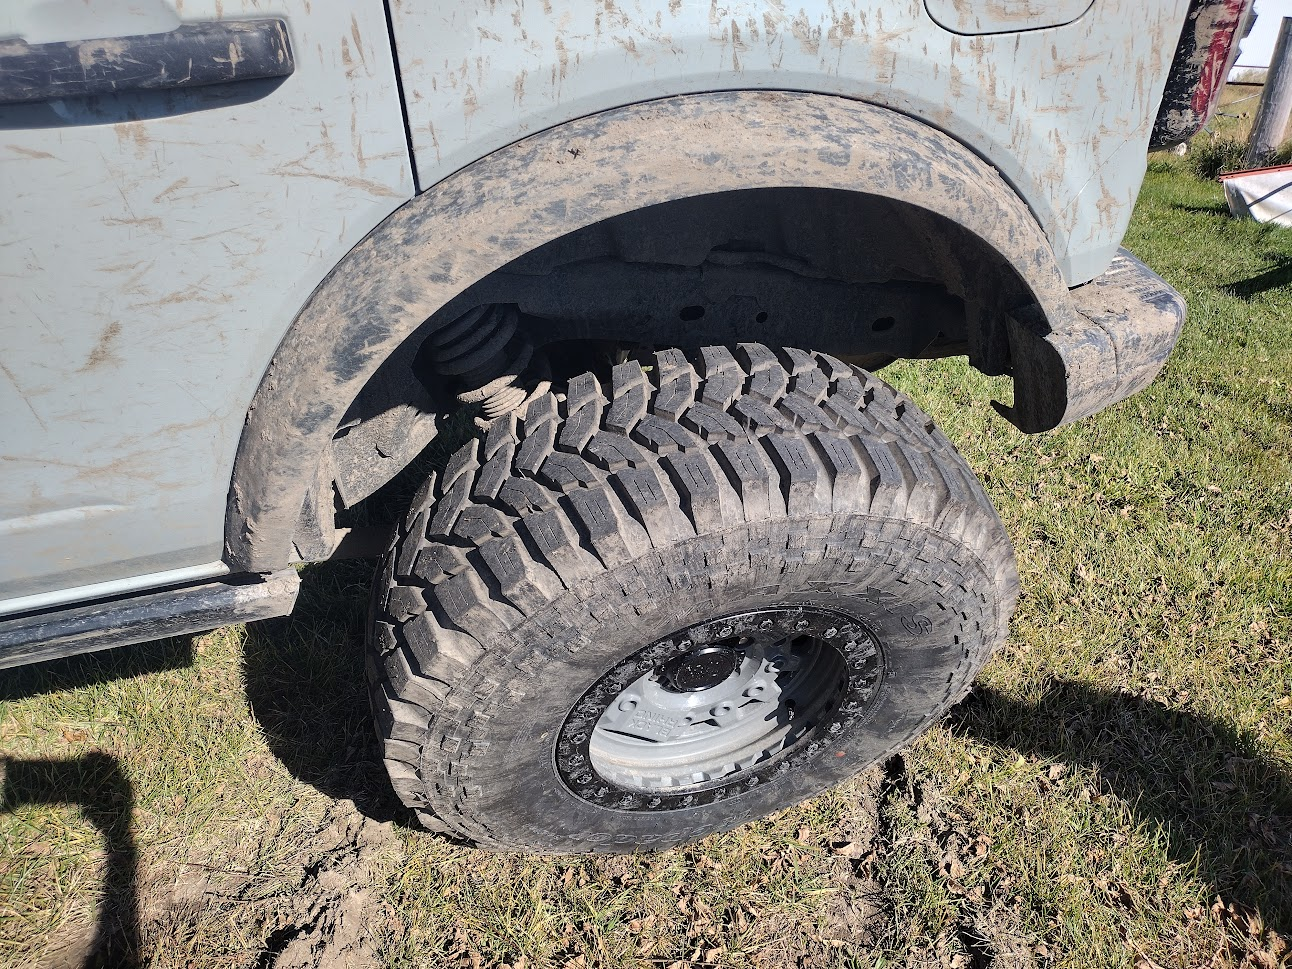 Ford Bronco 37" Tires on a Non-Sasquatch Badlands - My Experience, Results, Pics 1666477562437